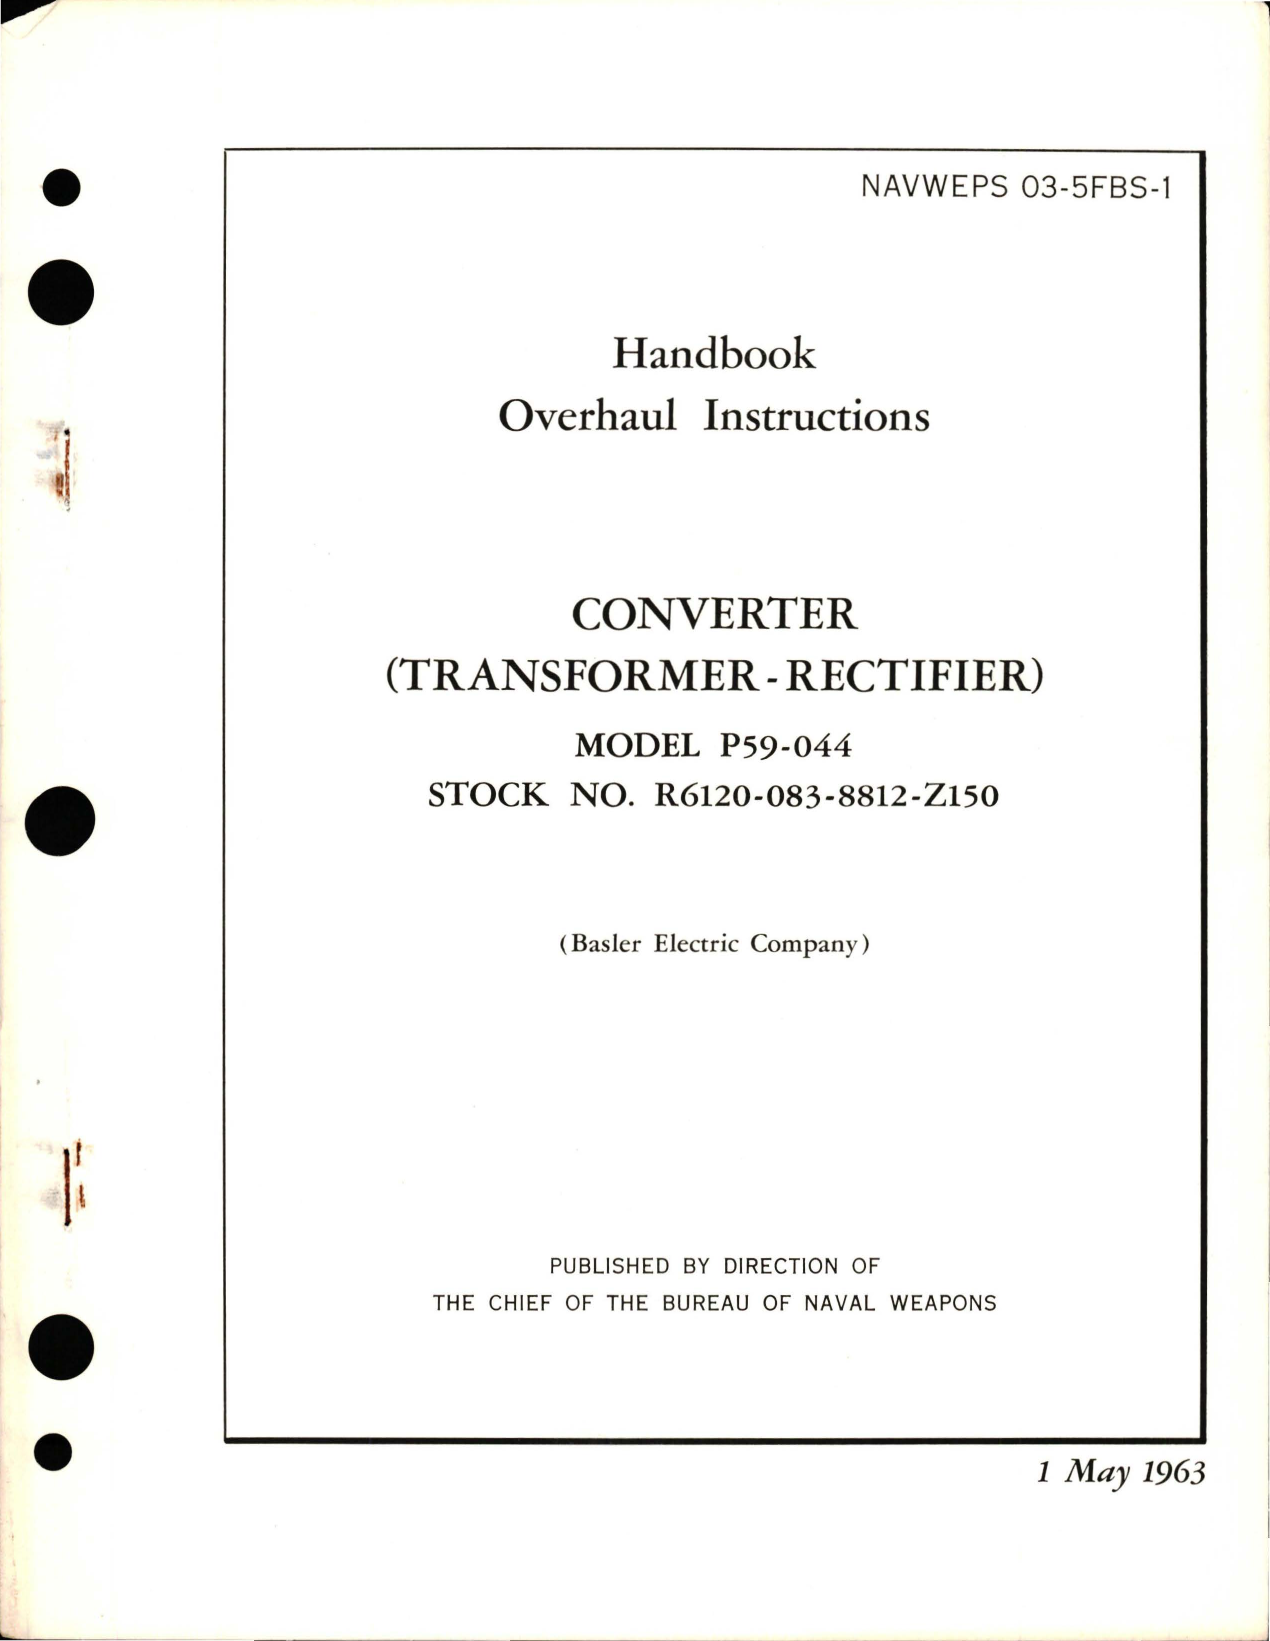 Sample page 1 from AirCorps Library document: Overhaul Instructions for Transformer Rectifier Converter - Model P59-044